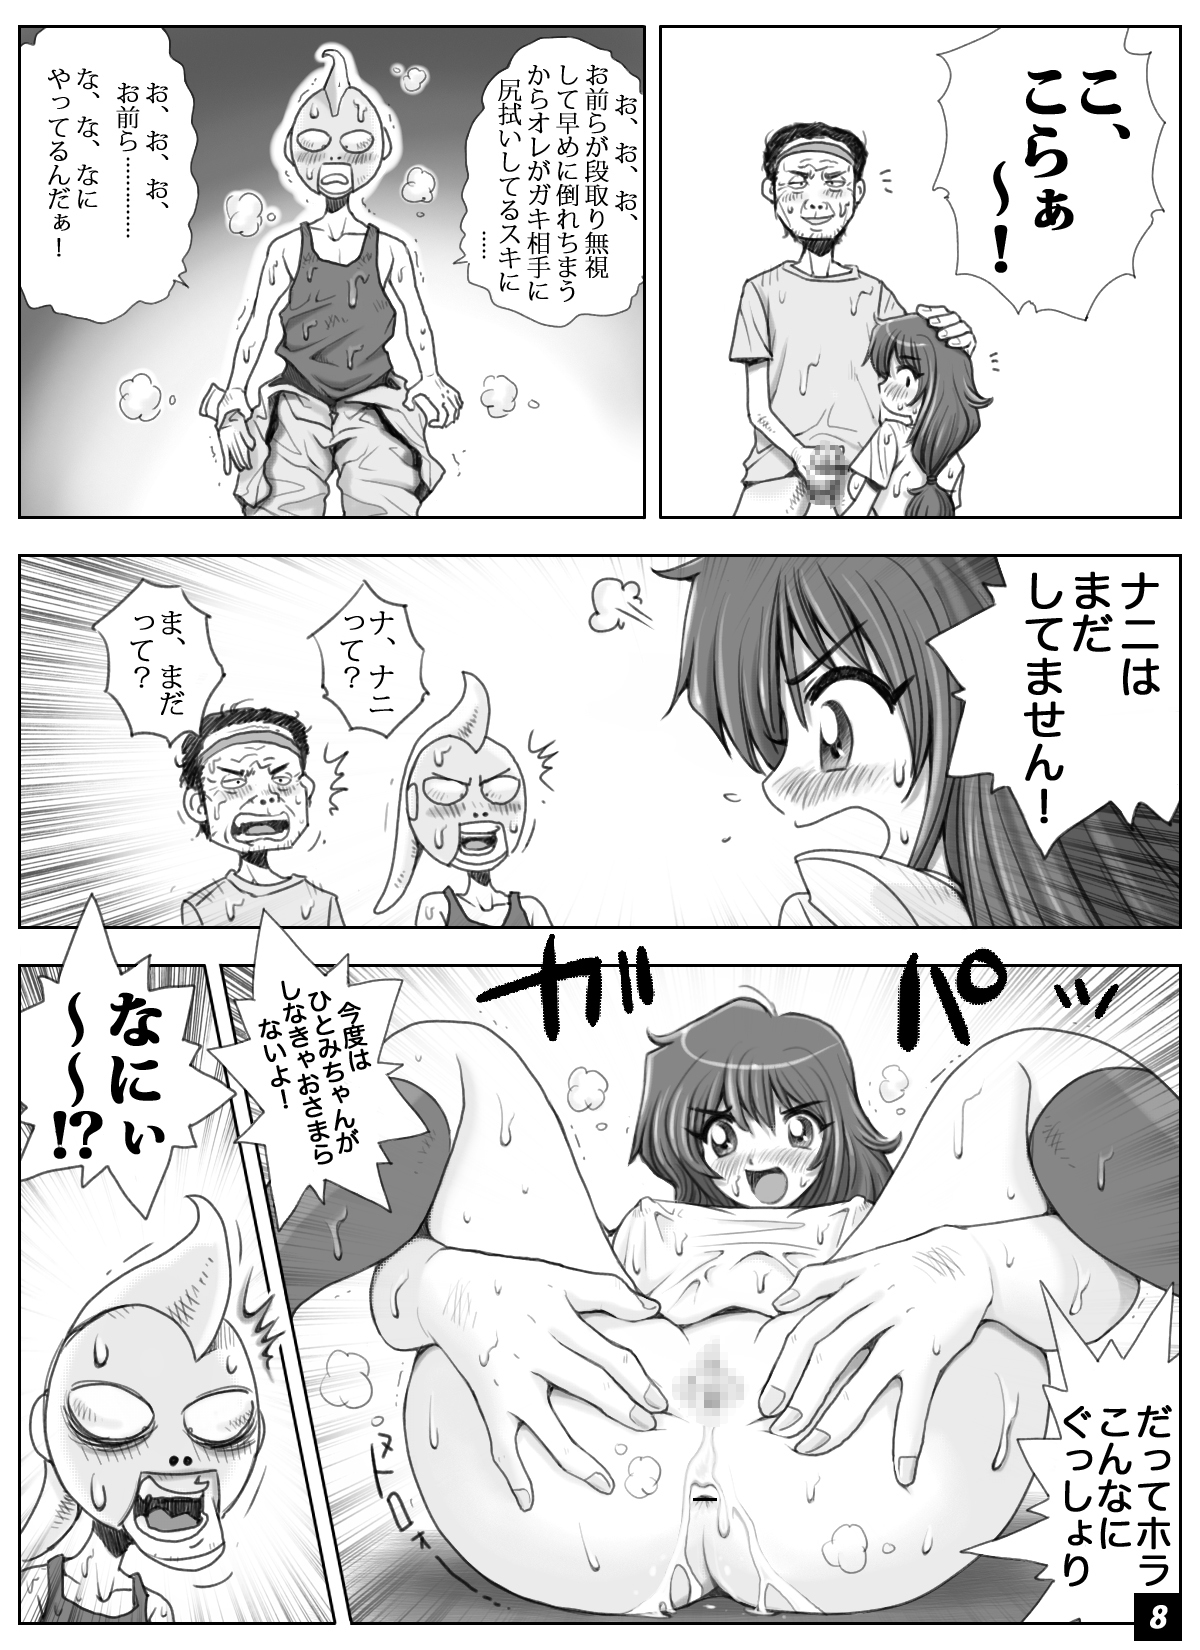 [M・S T Y L E] ikeikeフリーター ひとみちゃん Vol.6